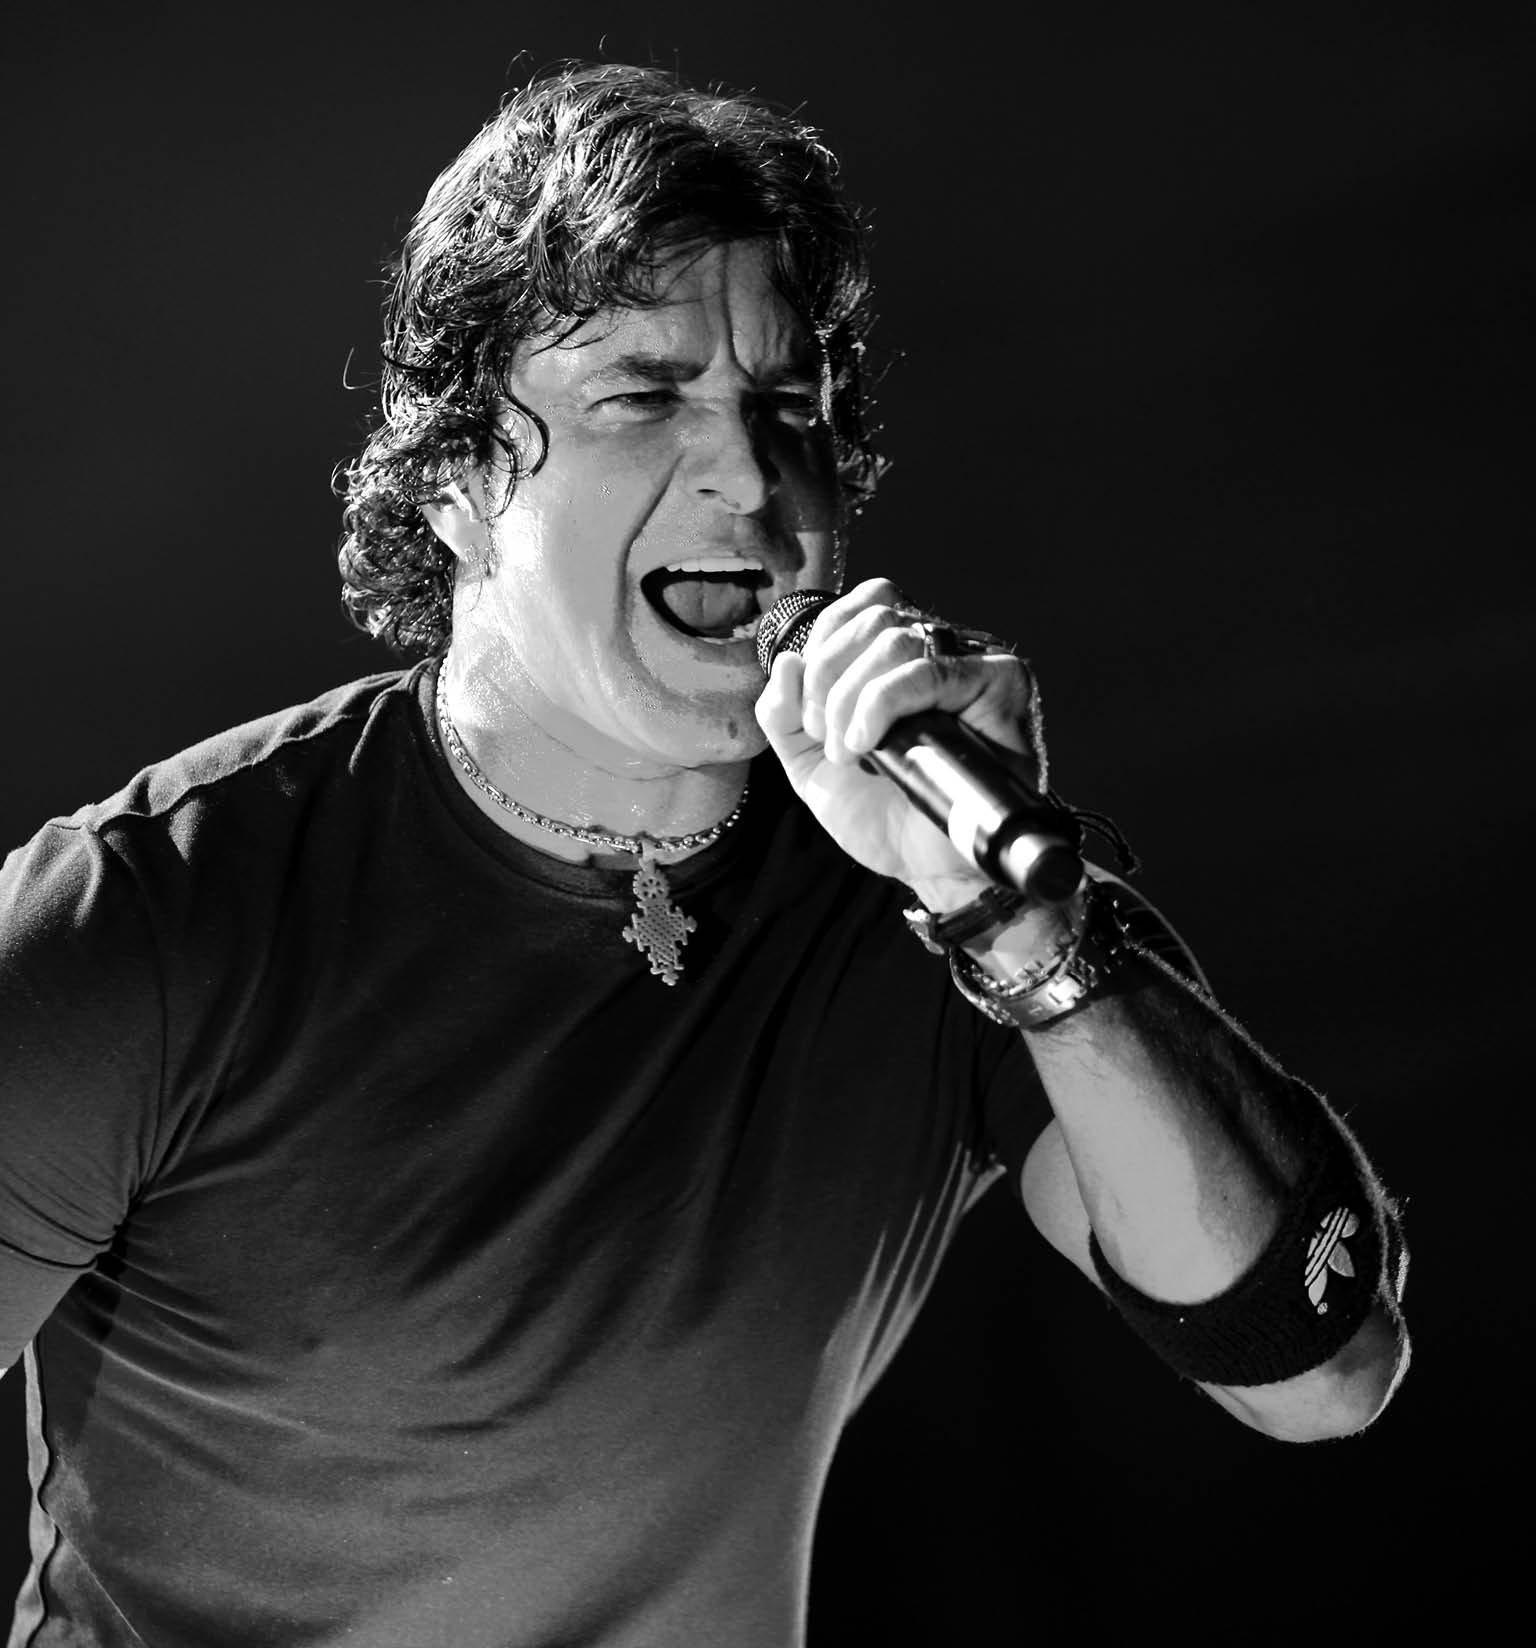 Scott Stapp of Creed performs at SuperPages.com Center in Dallas, TX, on September 3, 2010. <P> Pictured: Scott Stapp <P> <B>Ref: SPL220237  030910  </B><BR/> Picture by: Jason Janik / Splash News<BR/> </P><P> <B>Splash News and Pictures</B><BR/> Los Angeles: 310-821-2666<BR/> New York: 212-619-2666<BR/> London: 870-934-2666<BR/> photodesk@splashnews.com<BR/> </P>